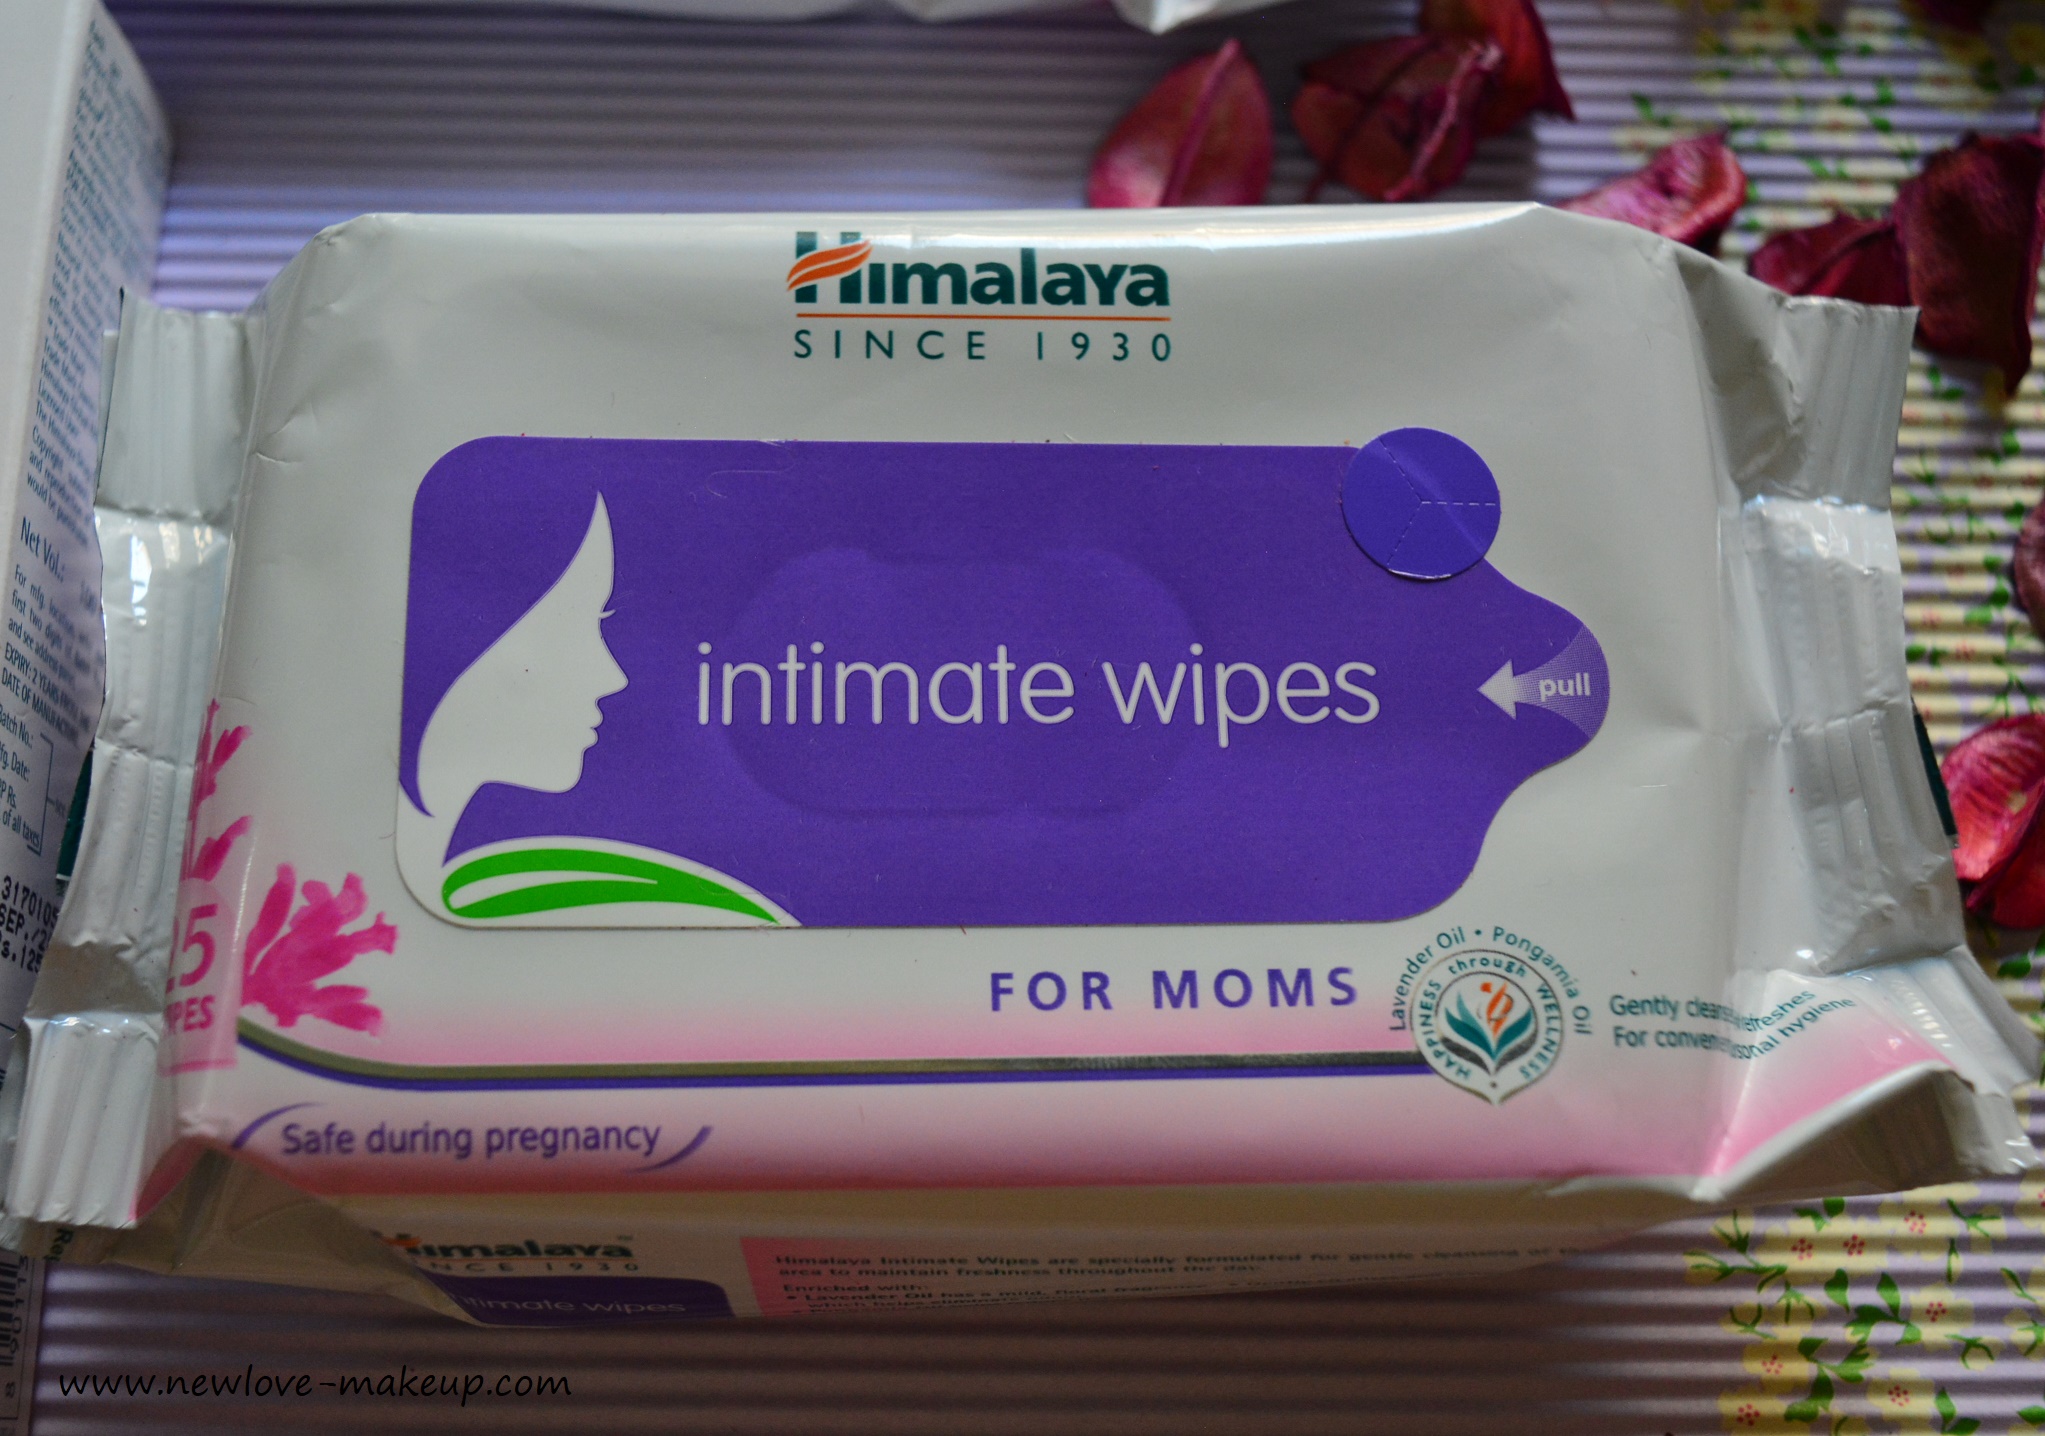 Himalaya For Moms Intimate Care Range Review